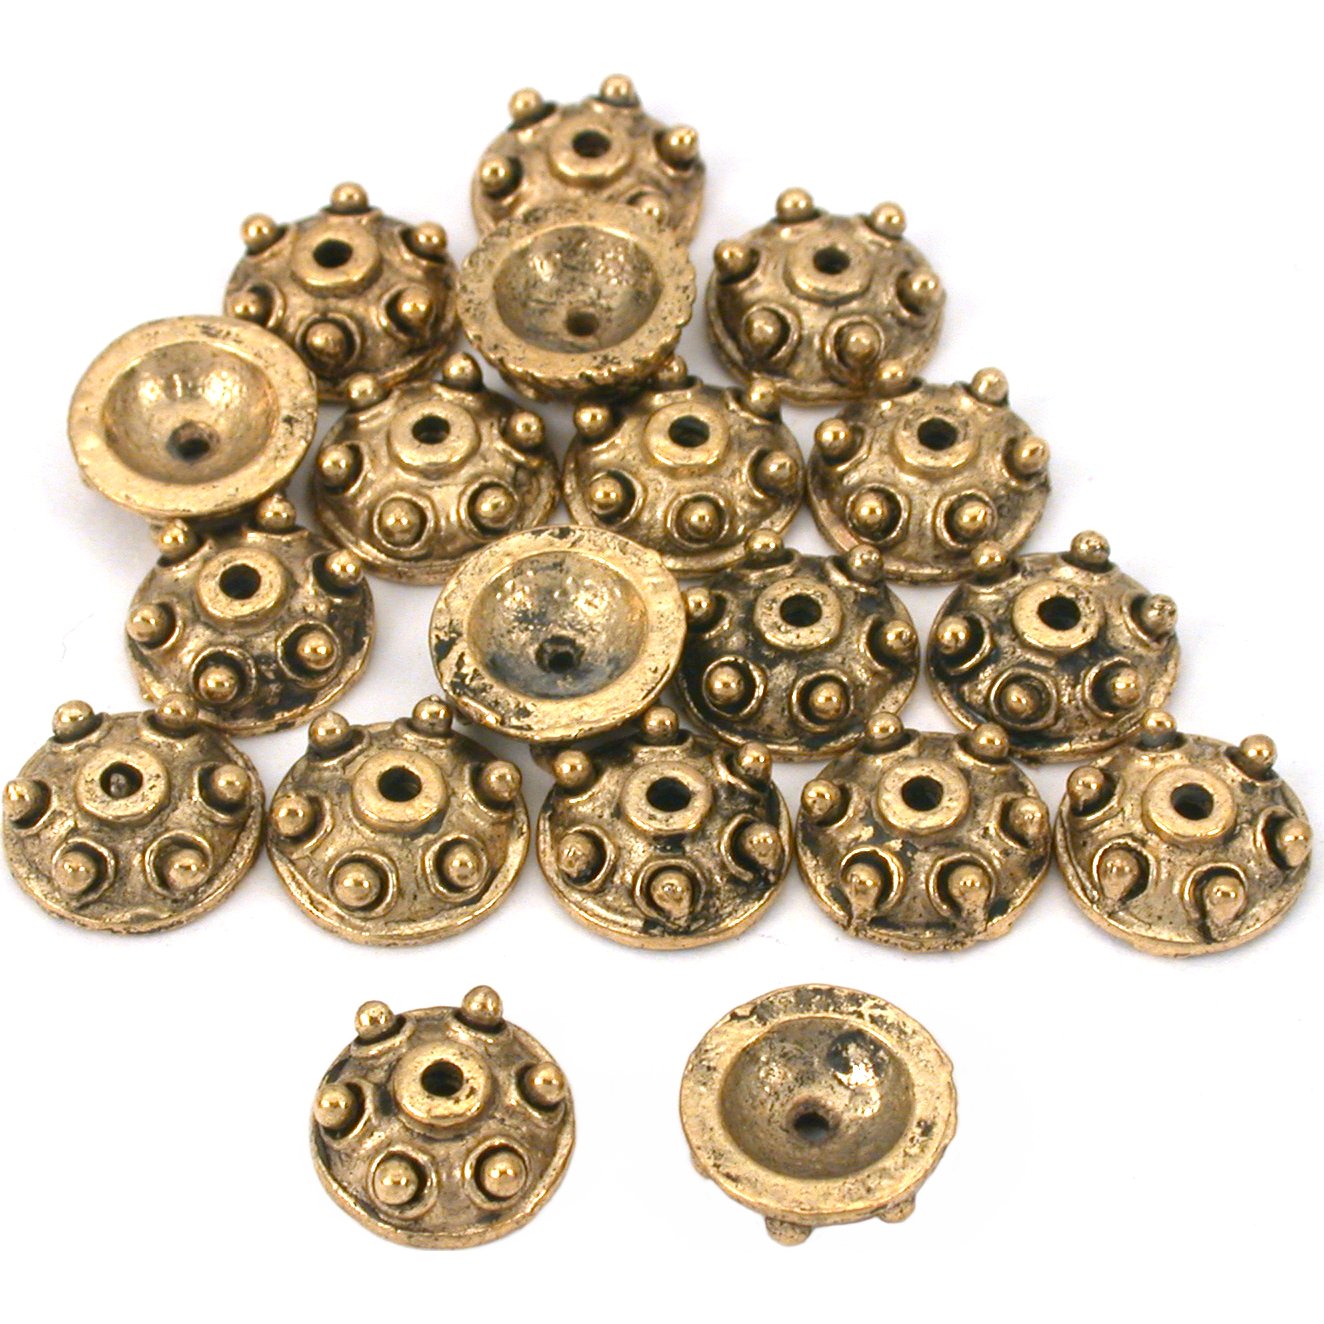 Bali Bead Caps Antique Gold Plated 9.5mm 20Pcs Approx.